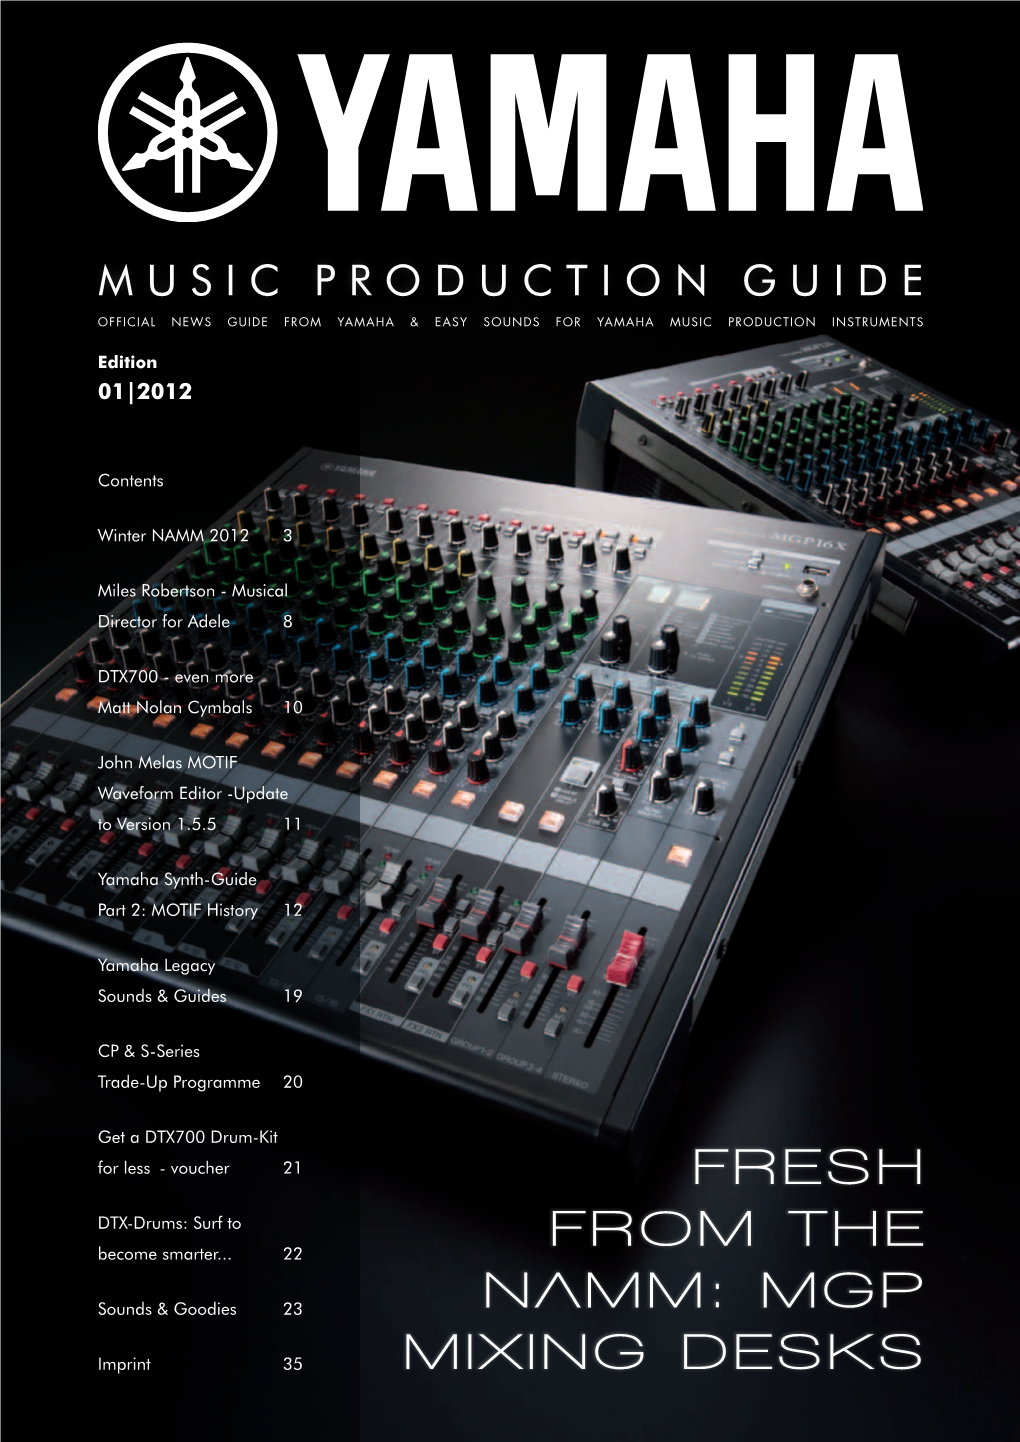 Musicproductionguide